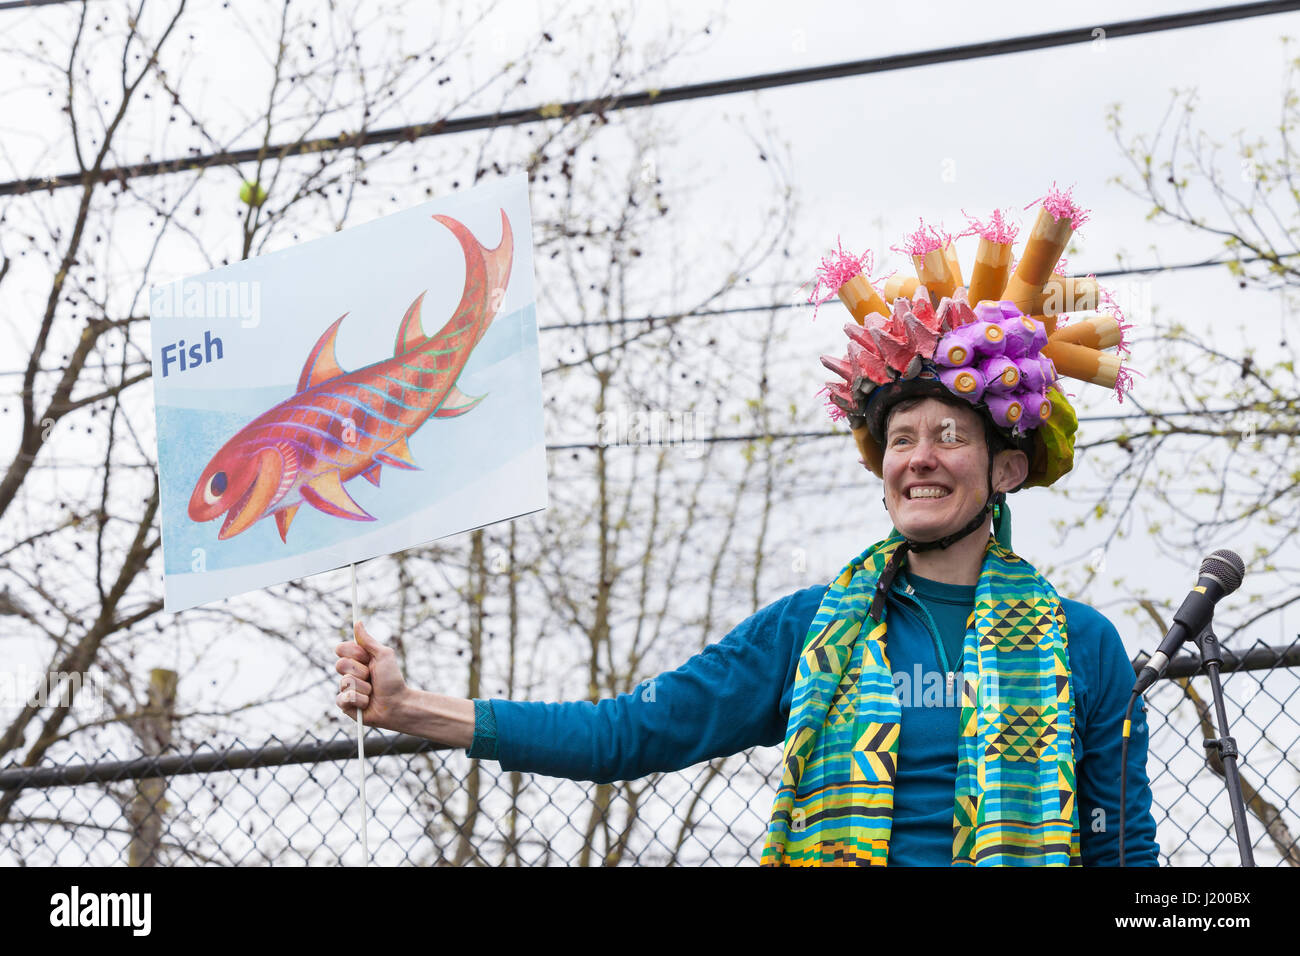 Seattle, Washington,USA. 22nd April, 2017. Karen Lewis co-author of “Grandmother Fish” a child's first book of Evolution, appears at the rally in Cal Anderson Park. The March for Science Seattle, a non-partisan rally and sister march to the National March for Science and over 600 cities across the world on Earth Day. Thousands marched from Cal Anderson Park in the Capitol Hill neighborhood to Seattle Center to celebrate science and the role it plays in everyday lives as well as to protest the policies of the Trump administration. Stock Photo